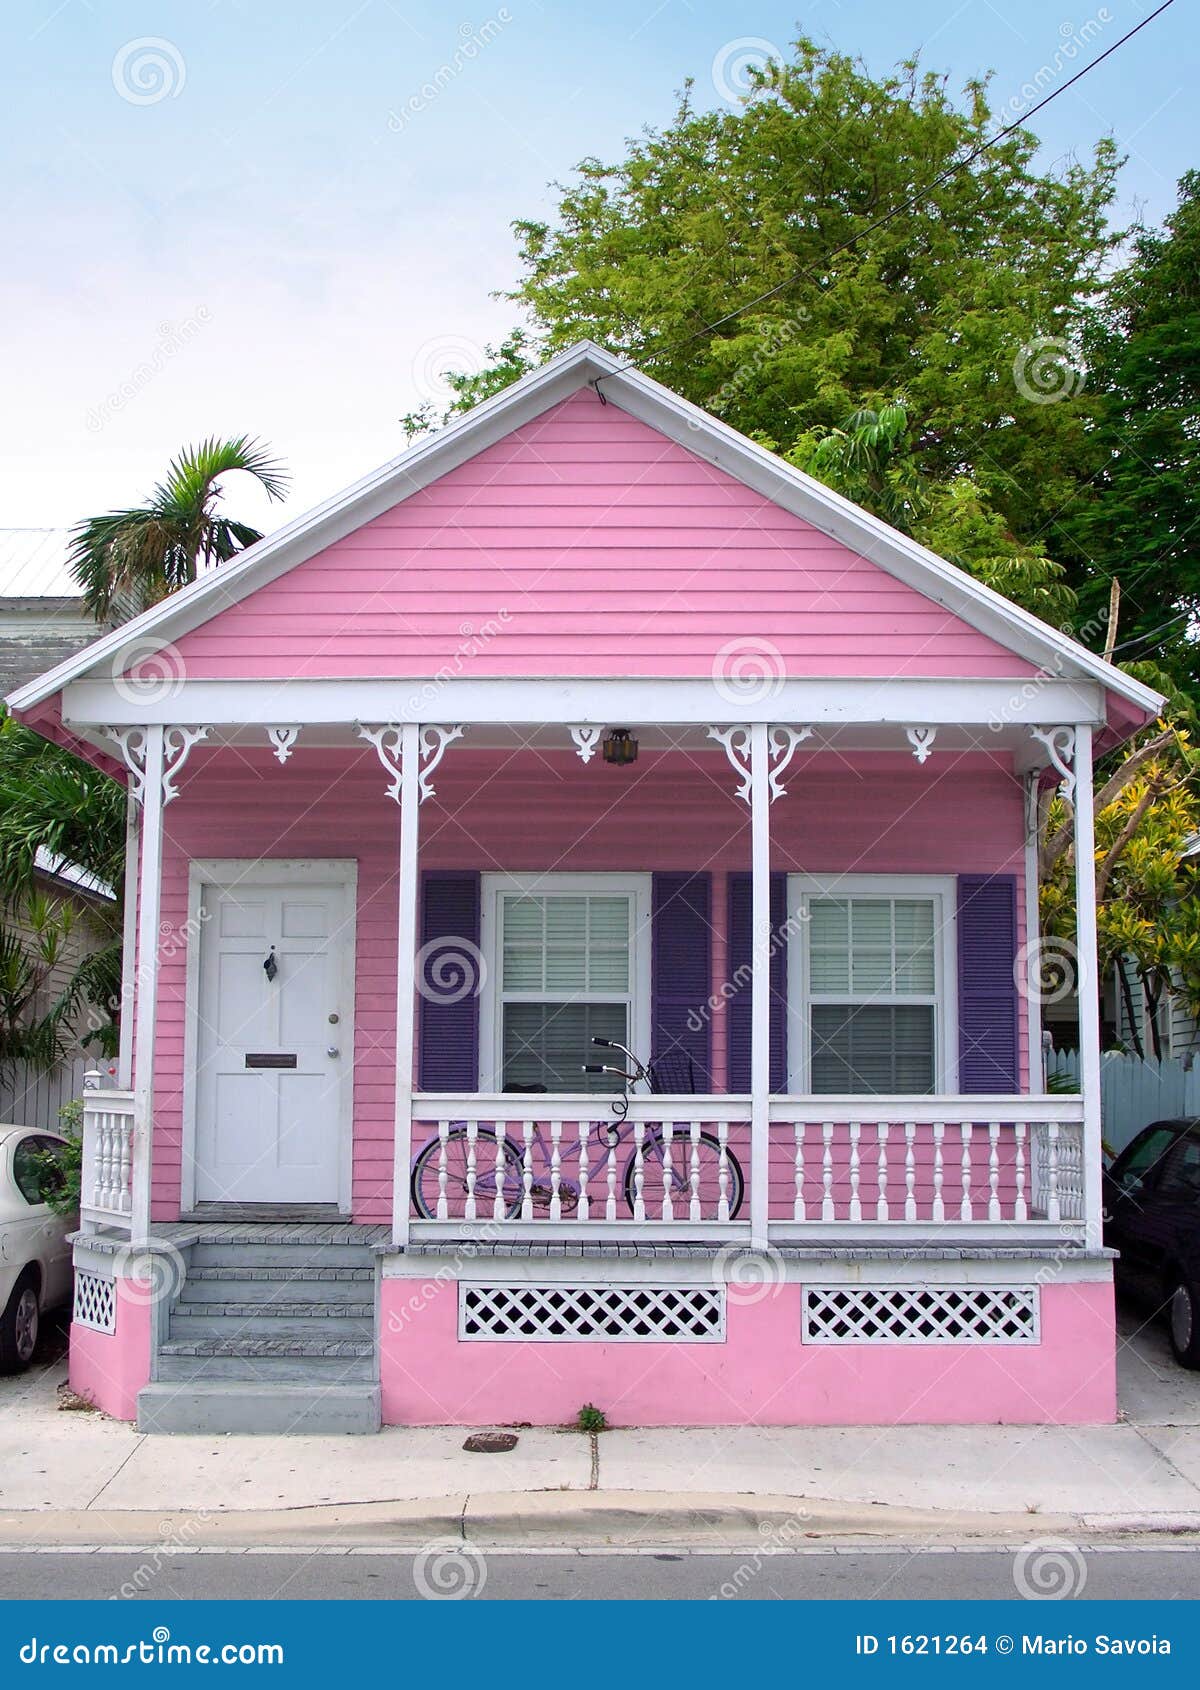 Pink House Stock Images - Image: 1621264